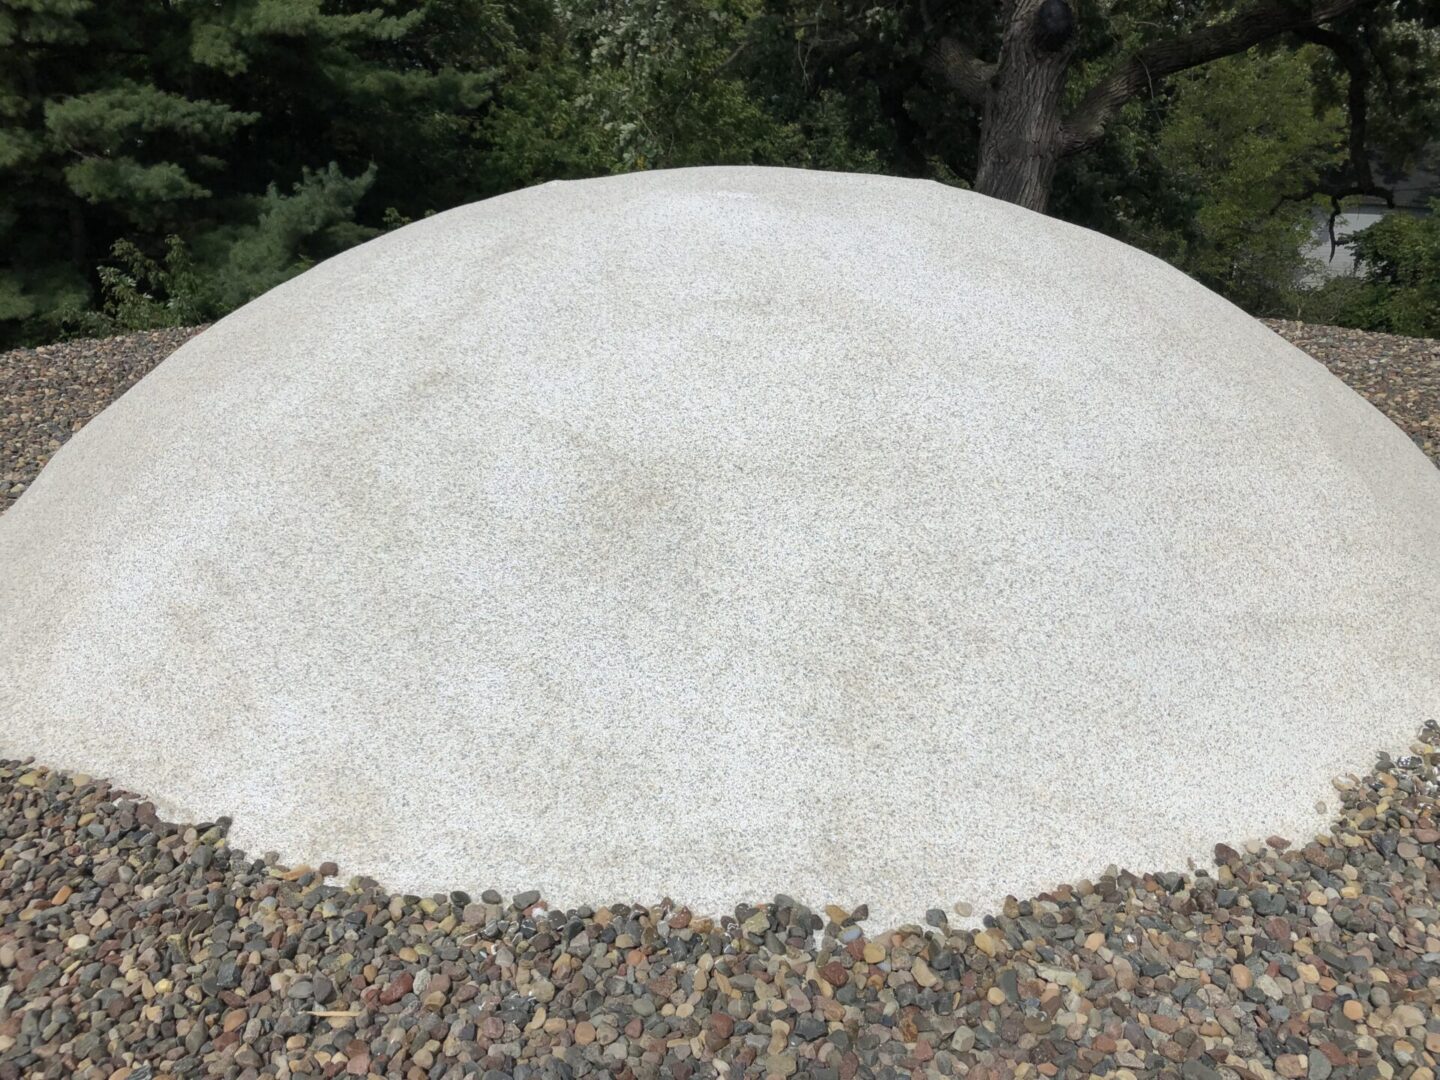 white dome construction for insulation surrounded by pebbles